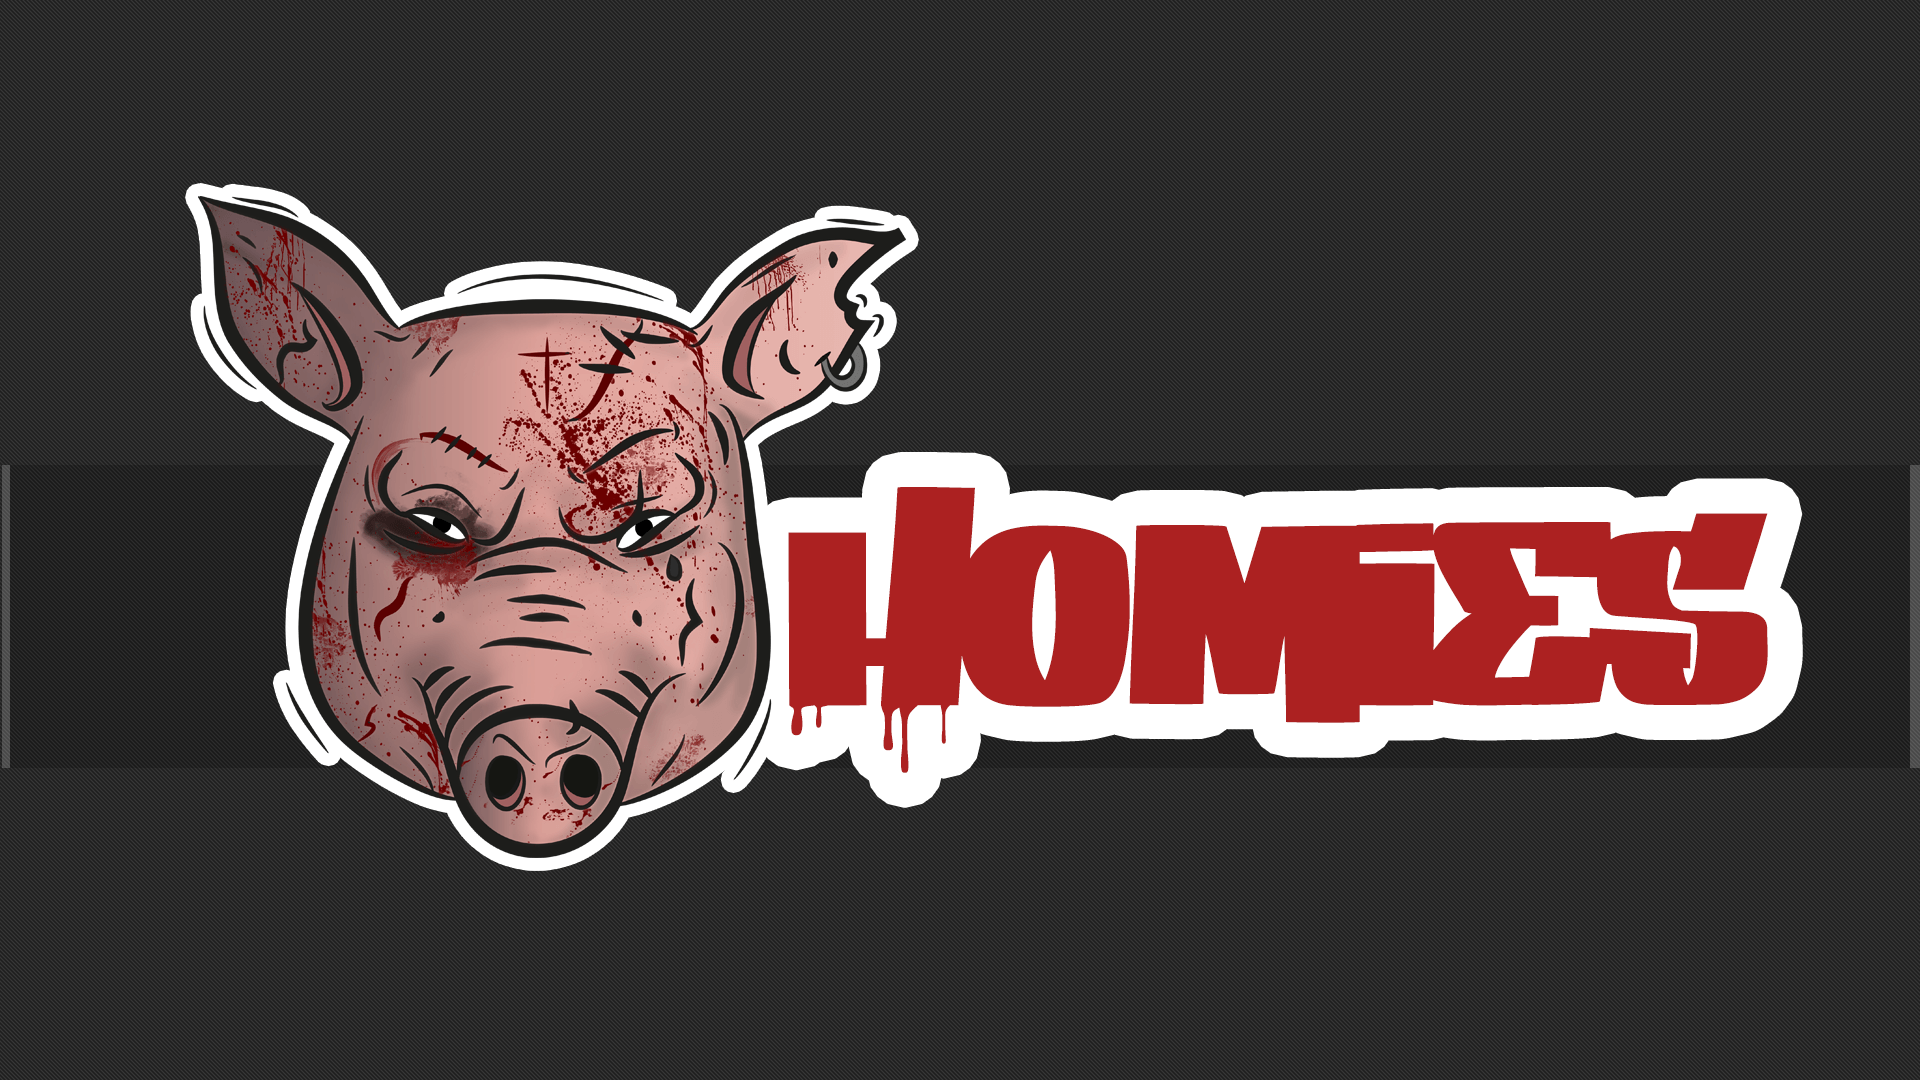 WALLPAPER) Oink for murders and homies rev 1.0 :)